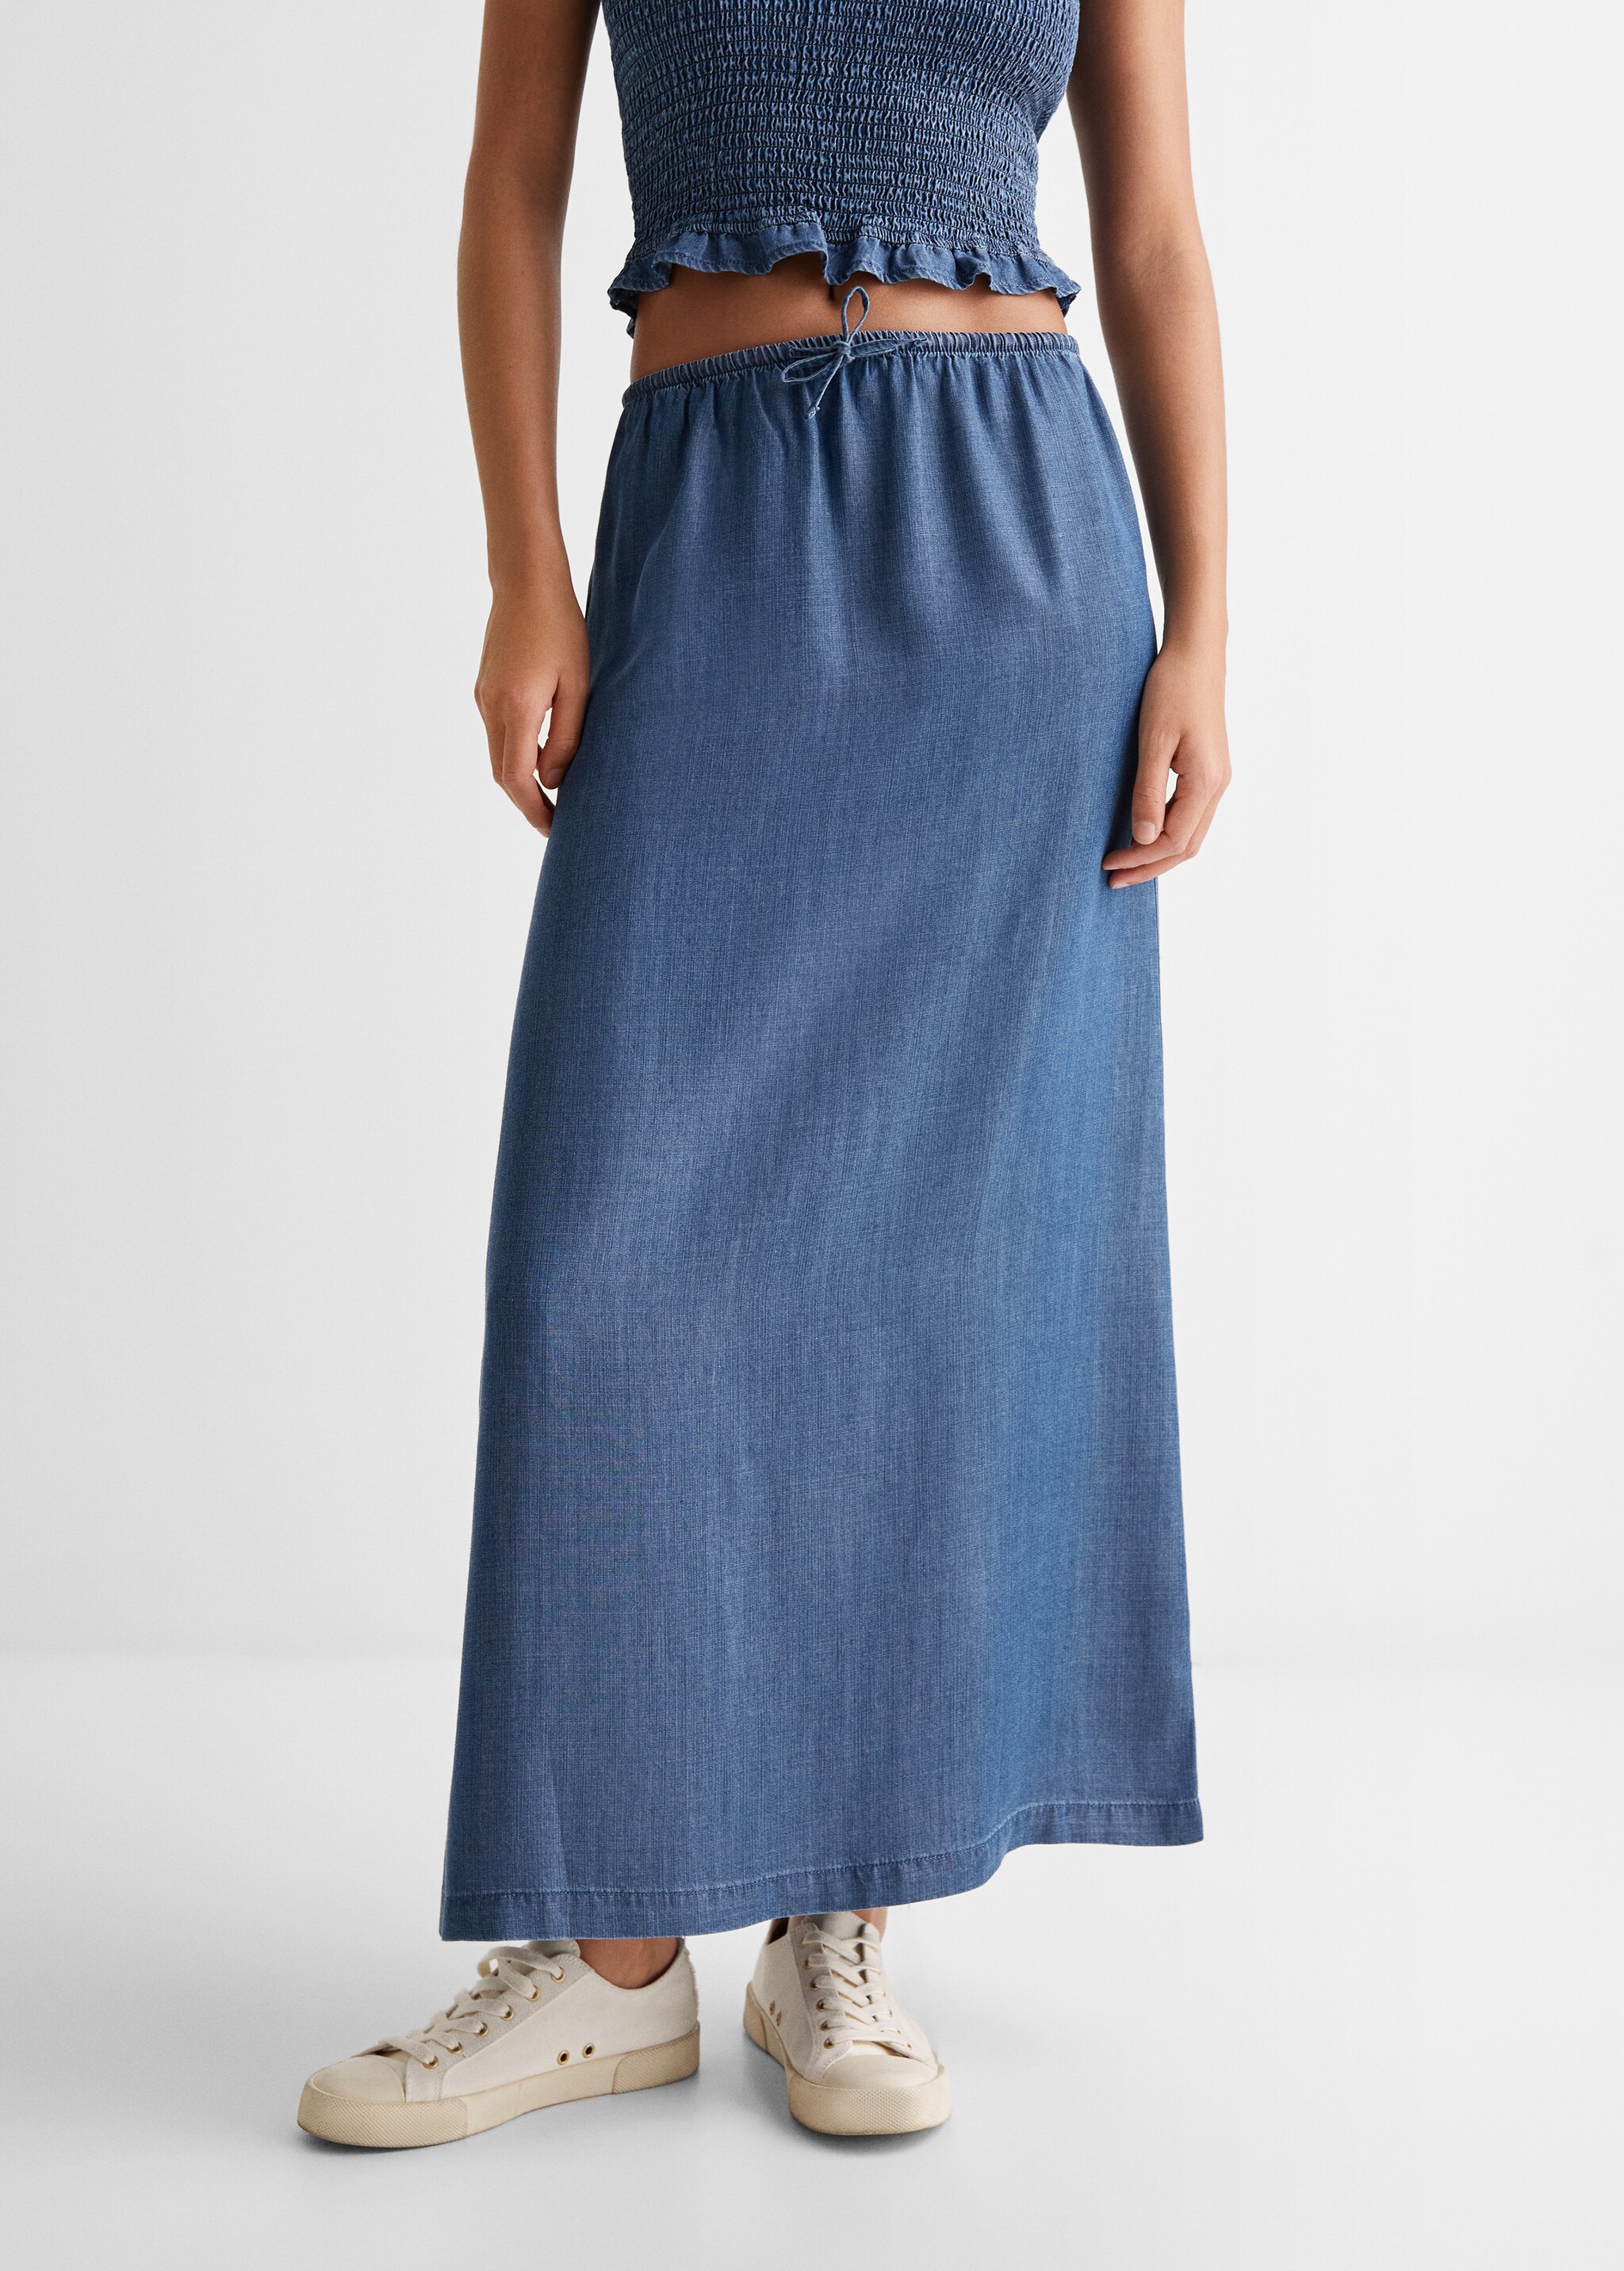 Stretch long skirt - Details of the article 6